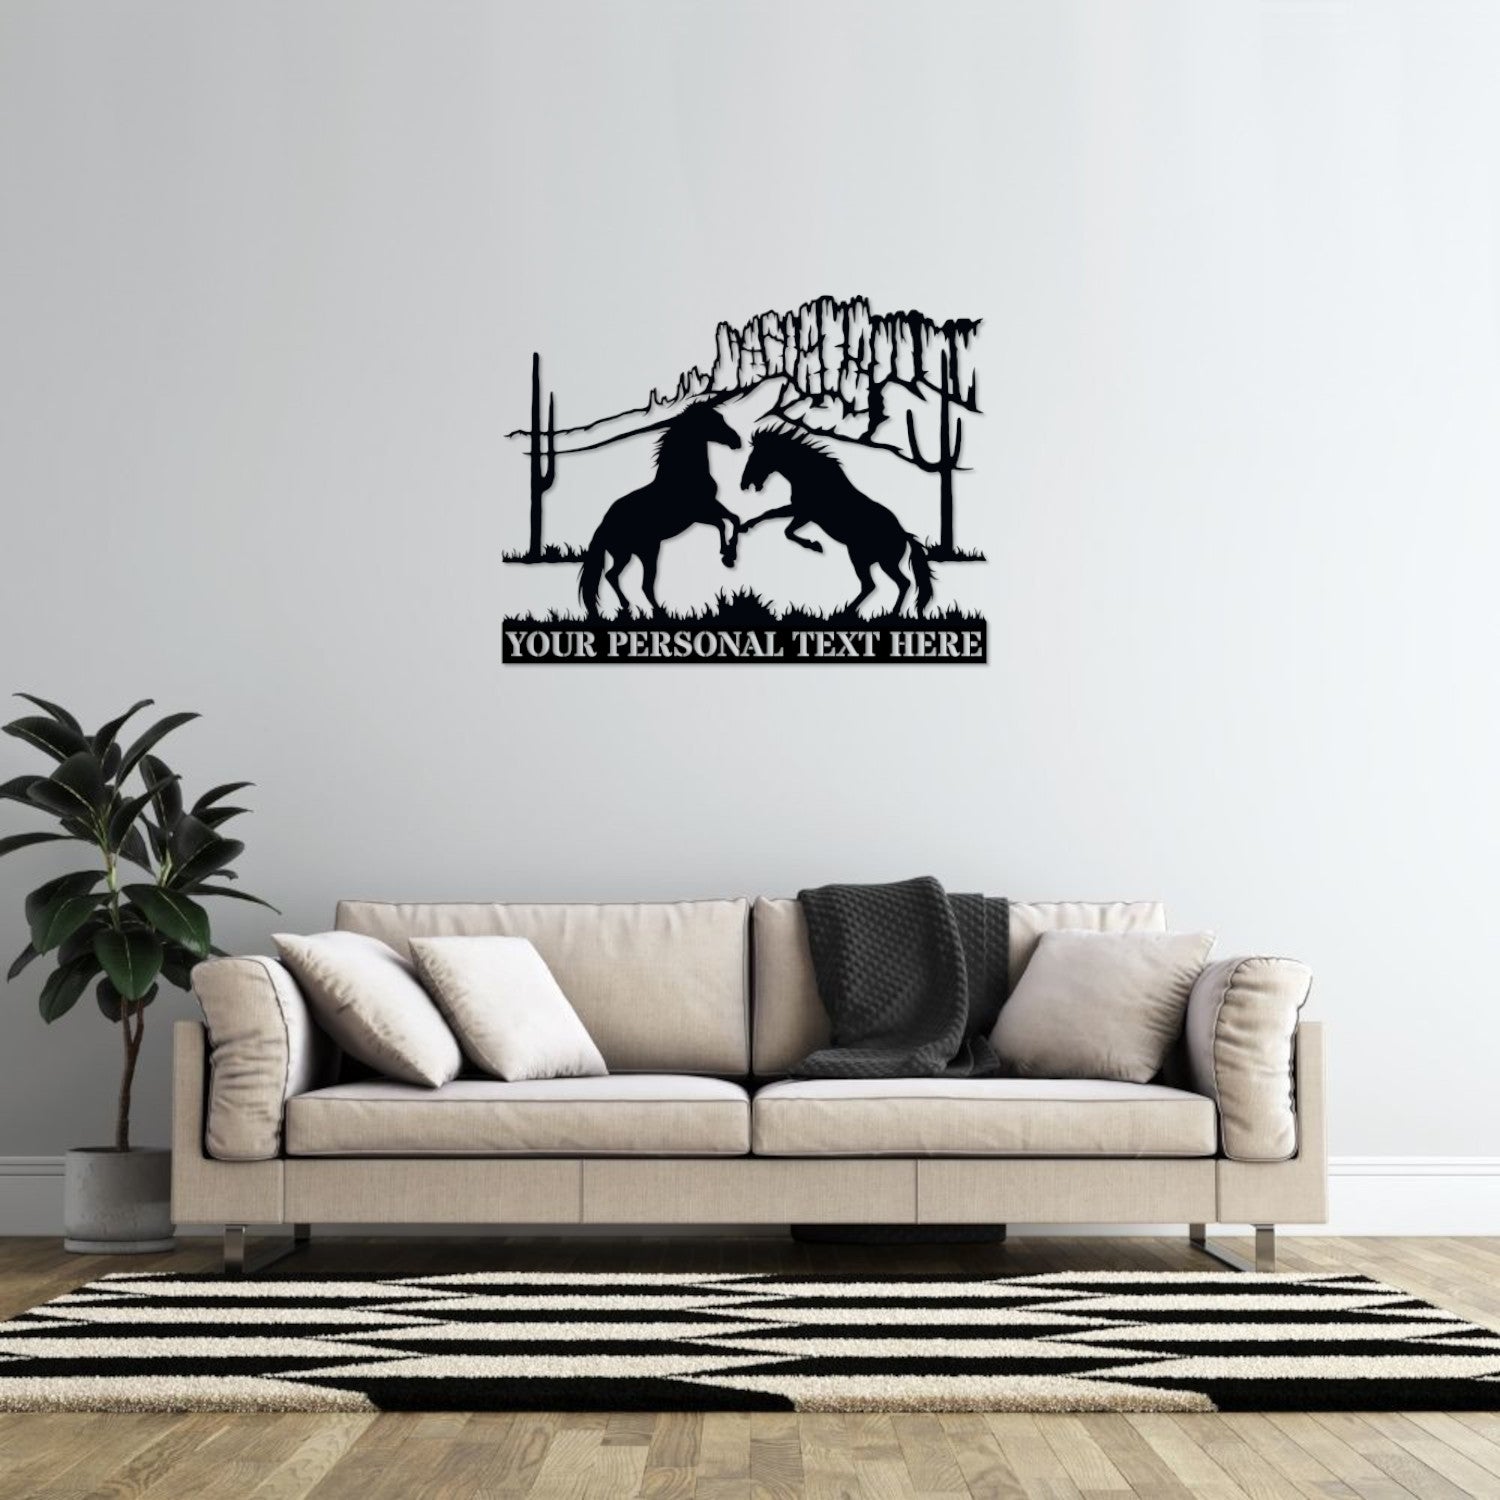 Personalized Nature Wildlife Horses Playing Black Metal Sign With Custom Text